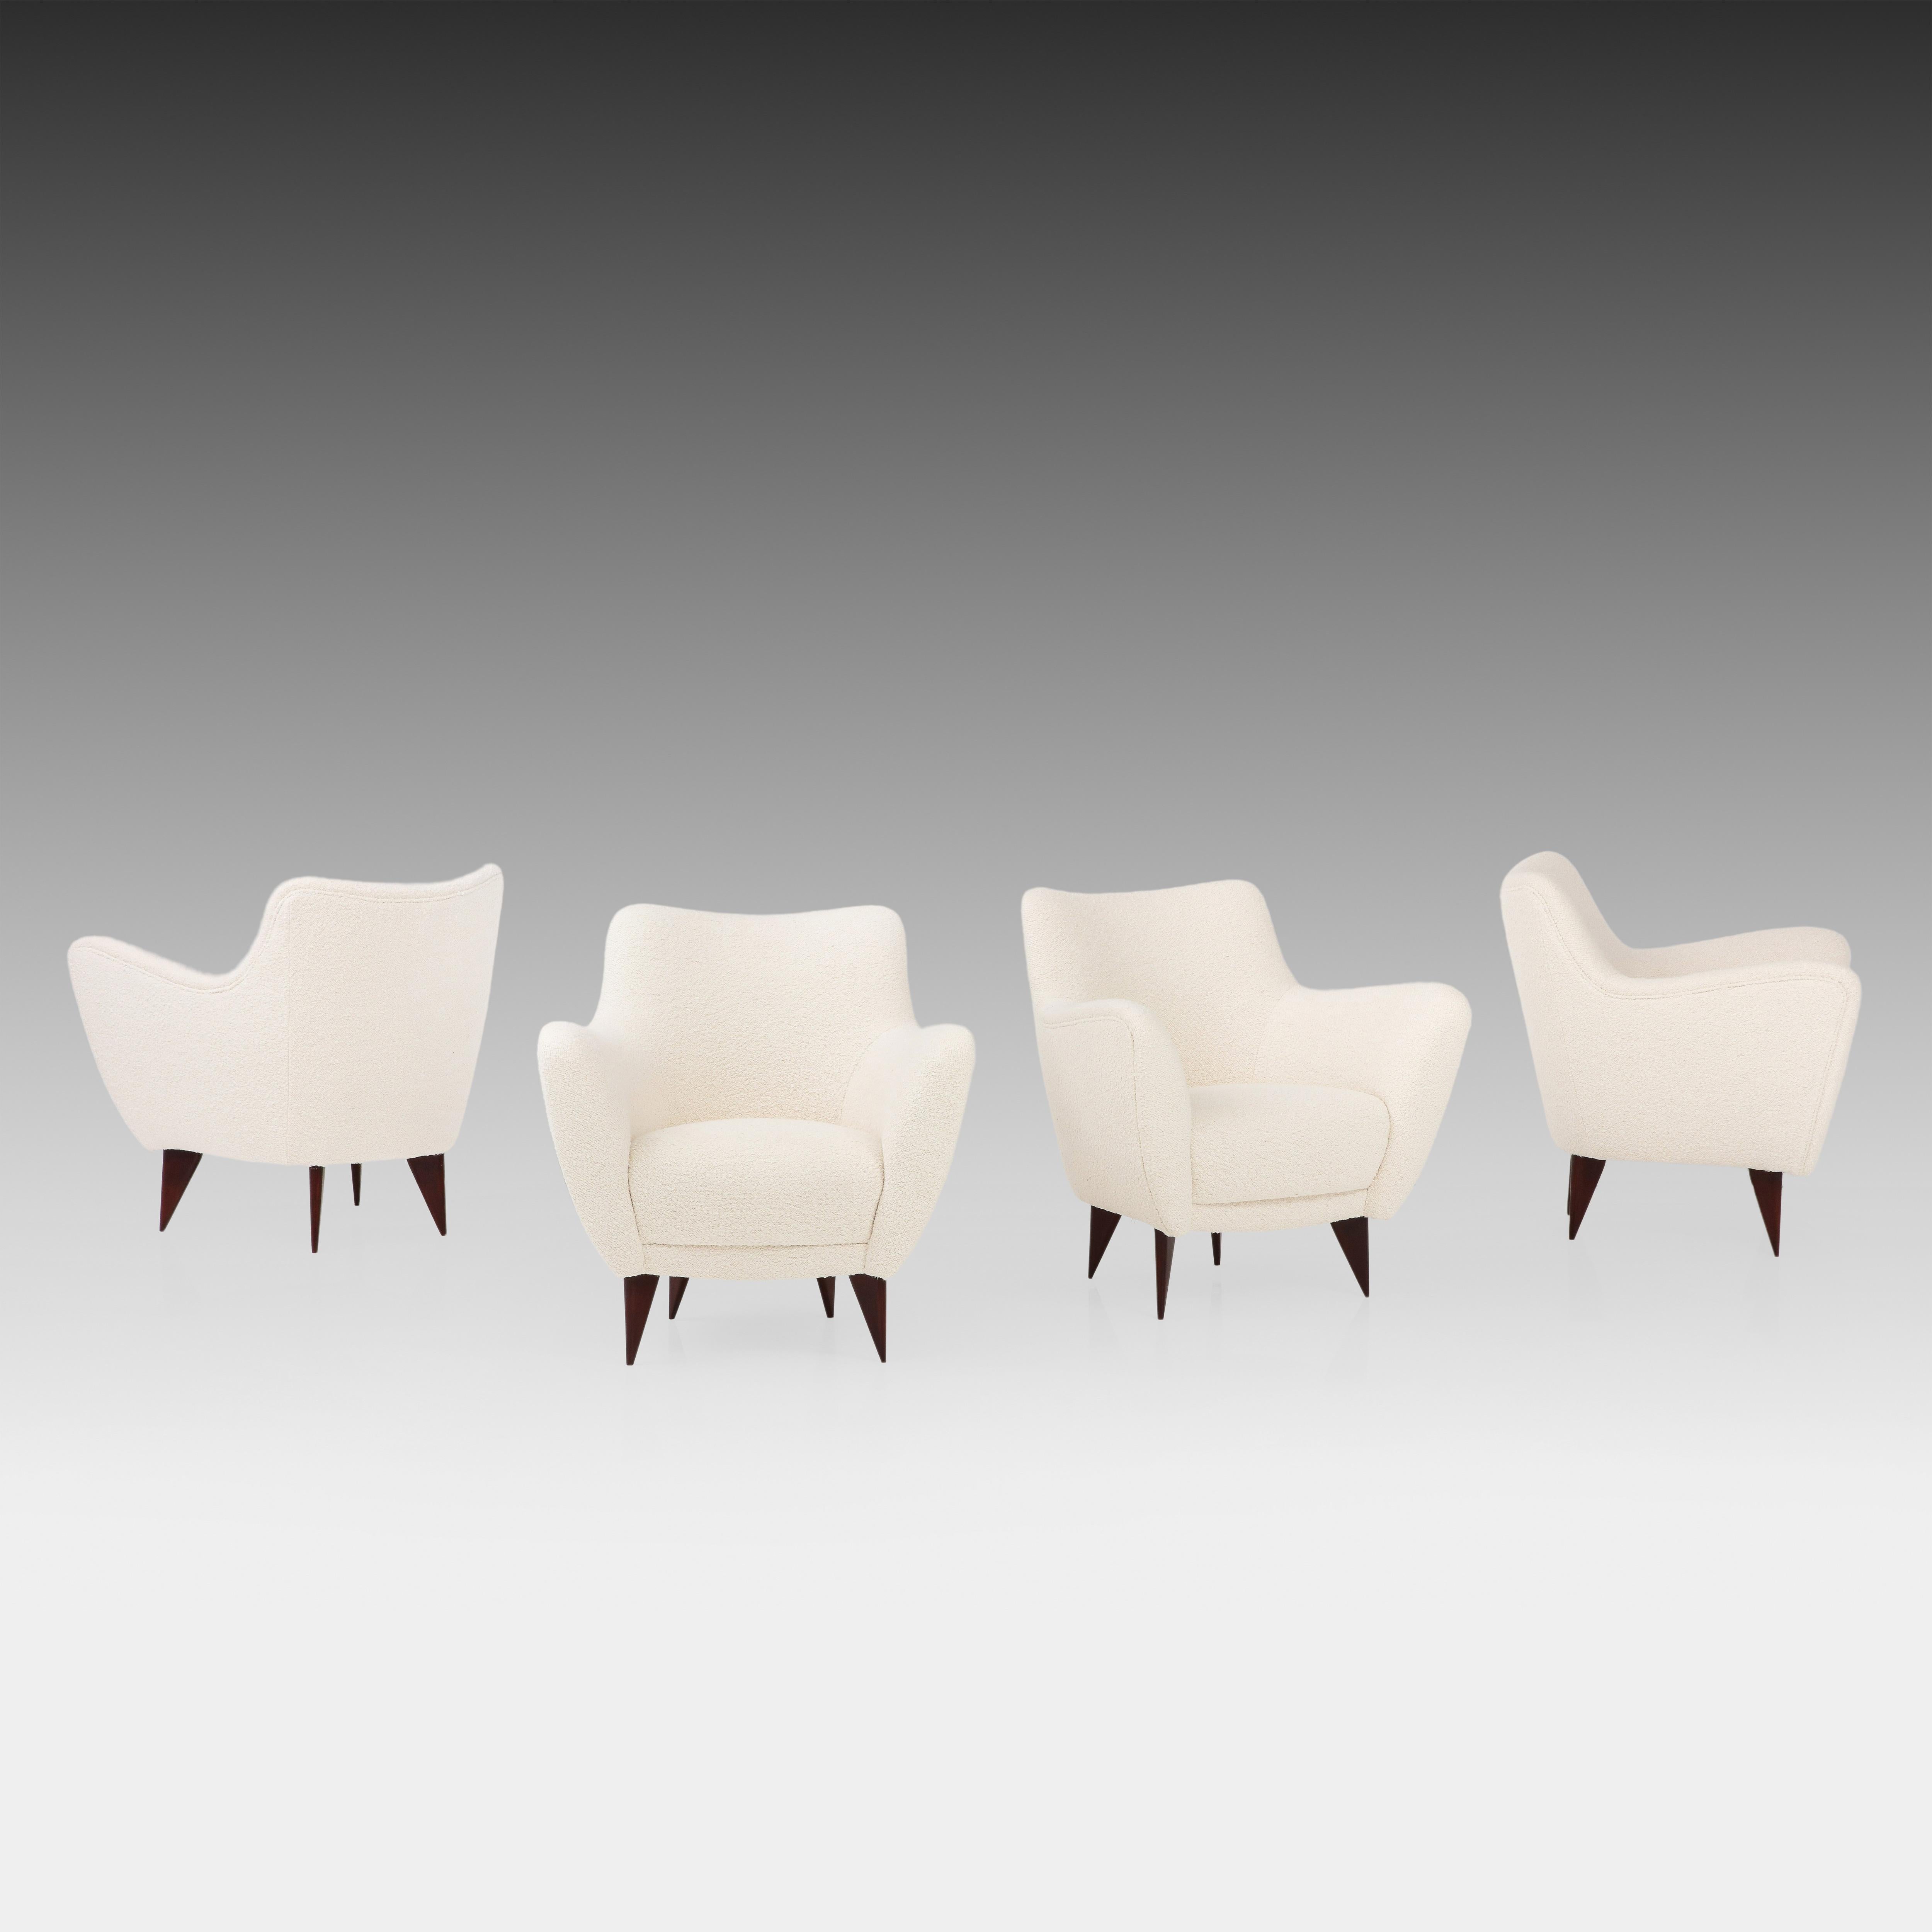 Giulia Veronesi for ISA Bergamo elegant and sculptural set of four Perla lounge chairs or armchairs with slightly curved back and gently outstretched arms ending in signature sharply tapered triangular walnut legs.  This chic model features